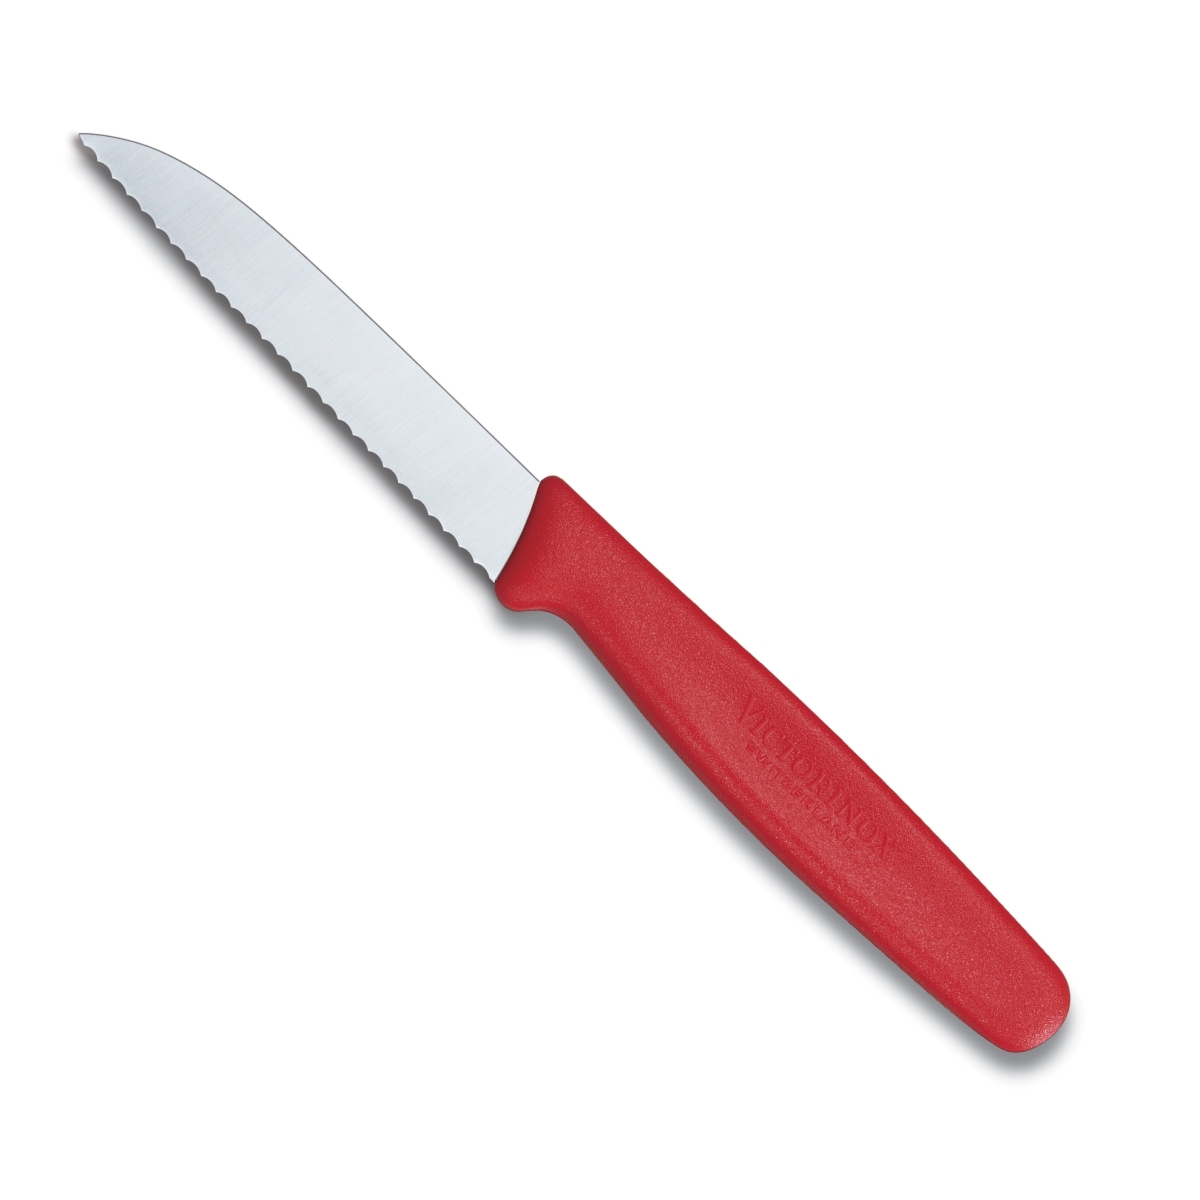 Swiss Army Brands Vic-40605 2019 3 In. Victorinox Kitchen Paring Small Handle, Sheeps Foot Serrated Edge Blade, Red